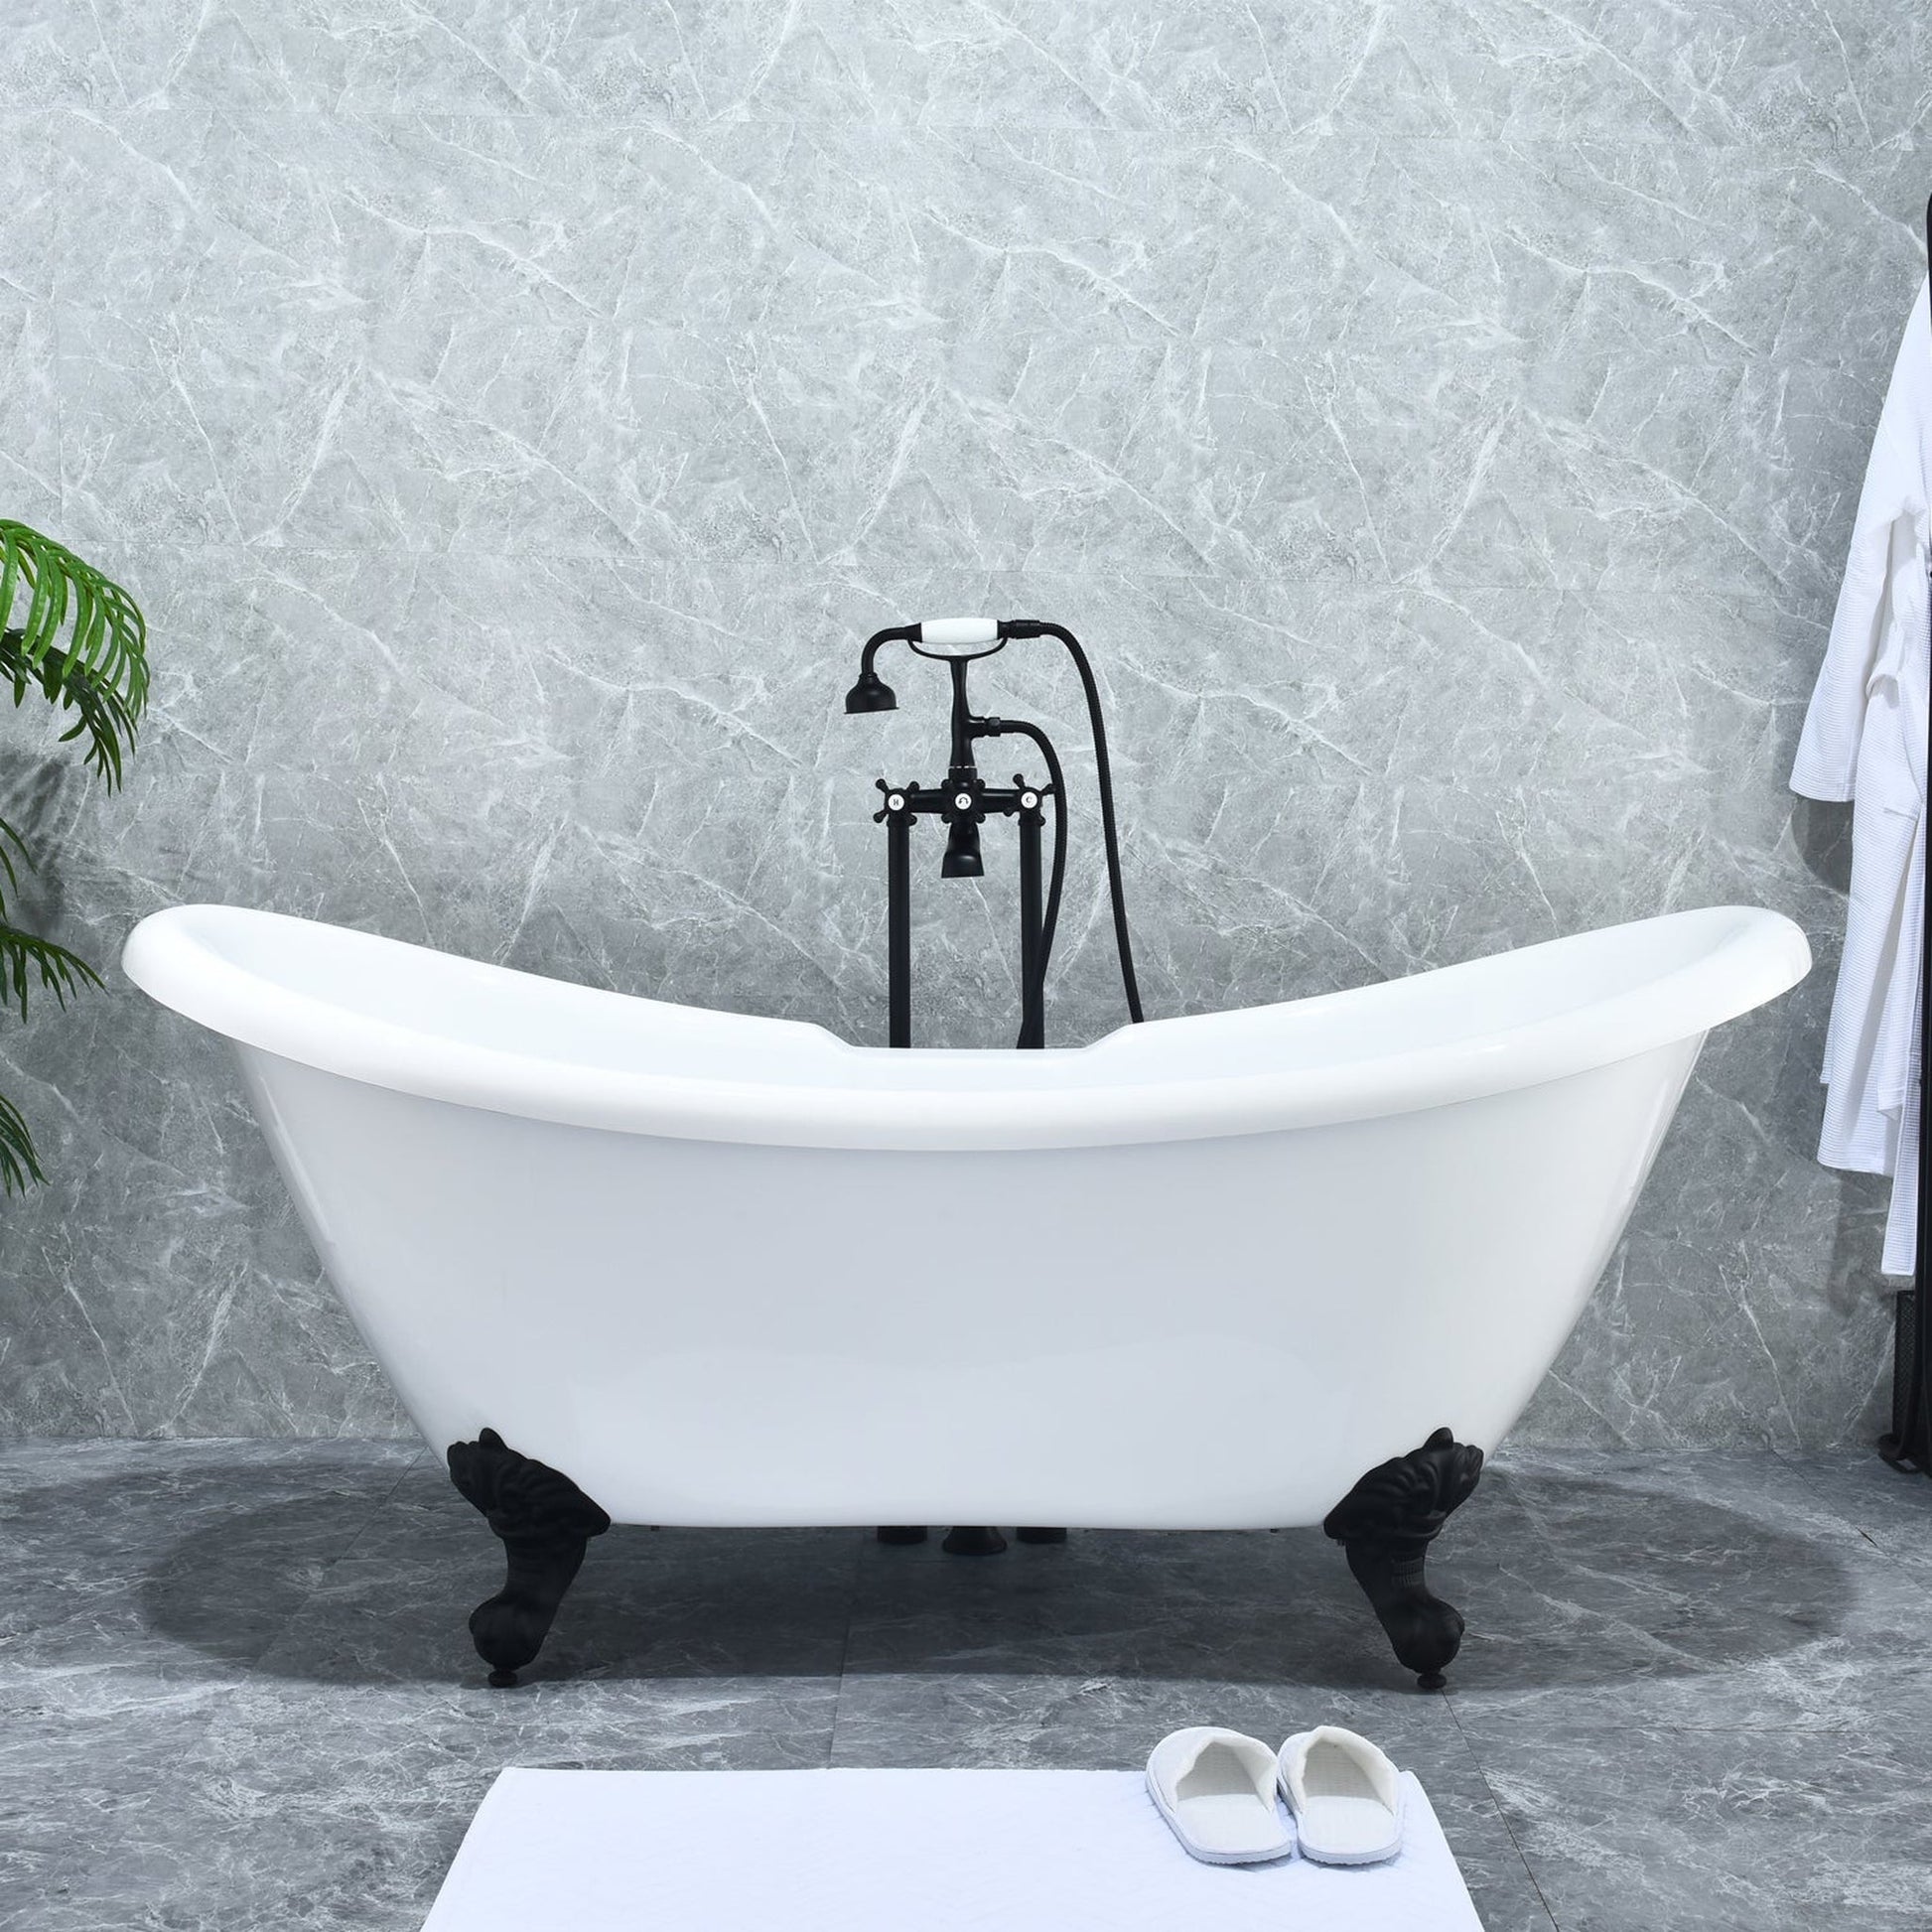 Altair Forcé Matte Black Vintage Style Cross Handle Claw Foot Freestanding Bathtub Faucet With Handshower